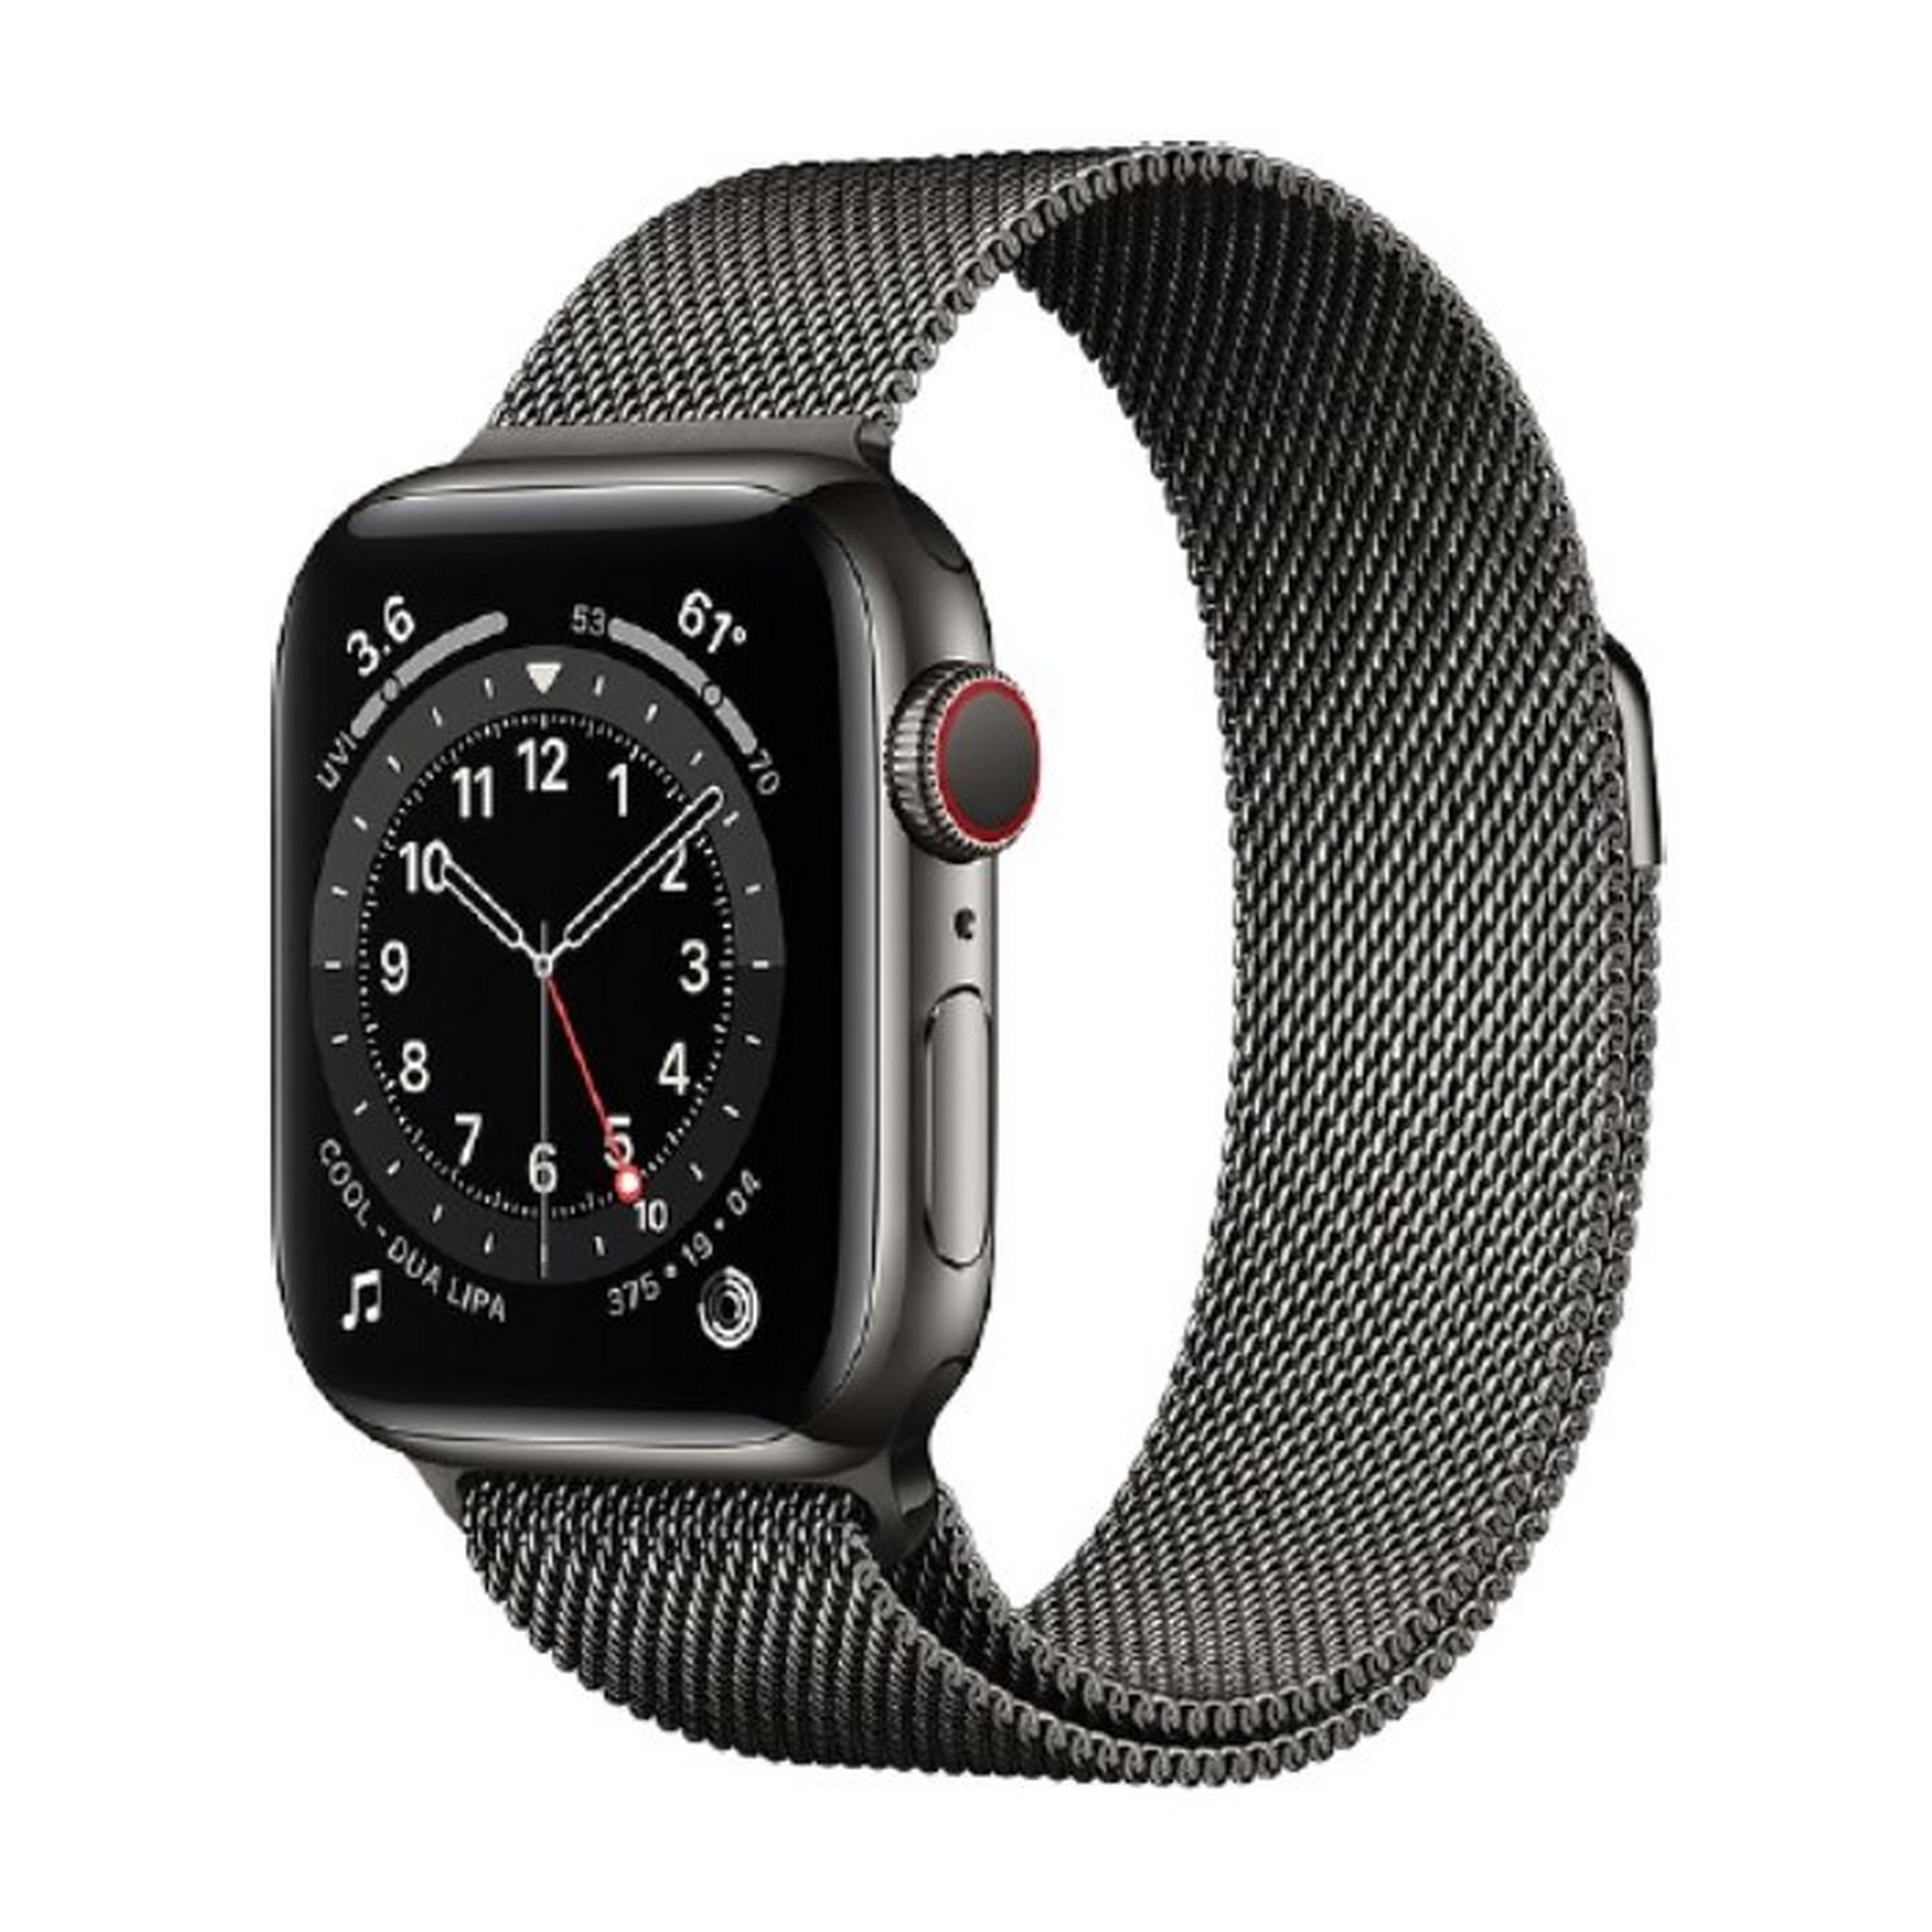 Apple Watch S6 40MM Cellular Stainless Steel Case - Graphite